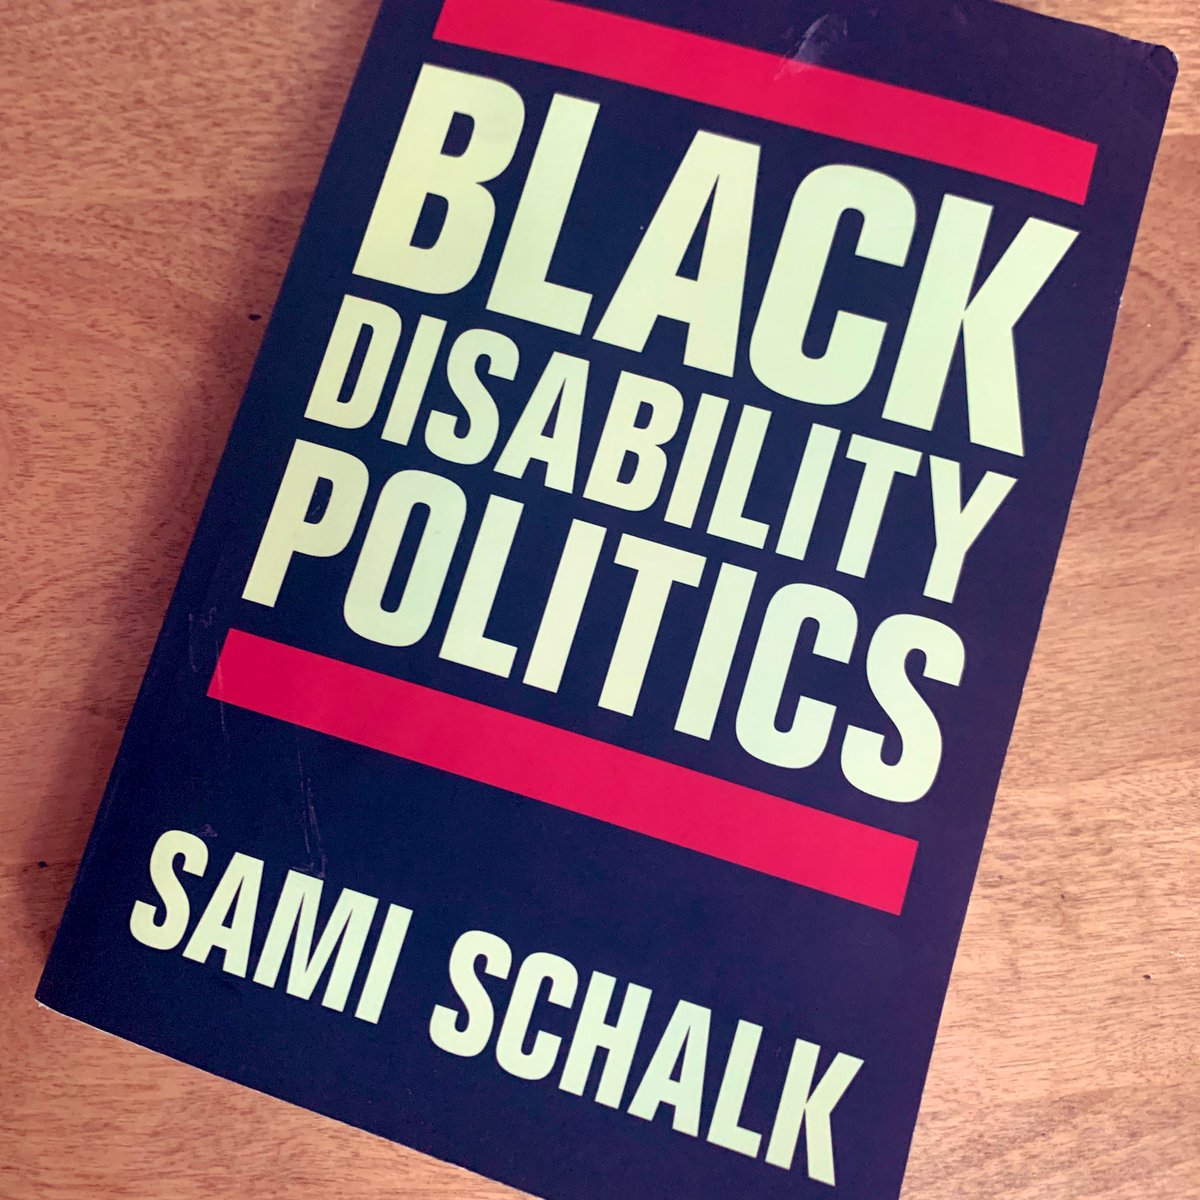 It’s my first month as a Just Tech Fellow and I’ve been busy meeting with disability justice activists across the country to discuss their work.

Reading #BlackDisabilityPolitics by @DrSamiSchalk was the best way to kick off/ground my research. Here are five key #a11y takeaways: